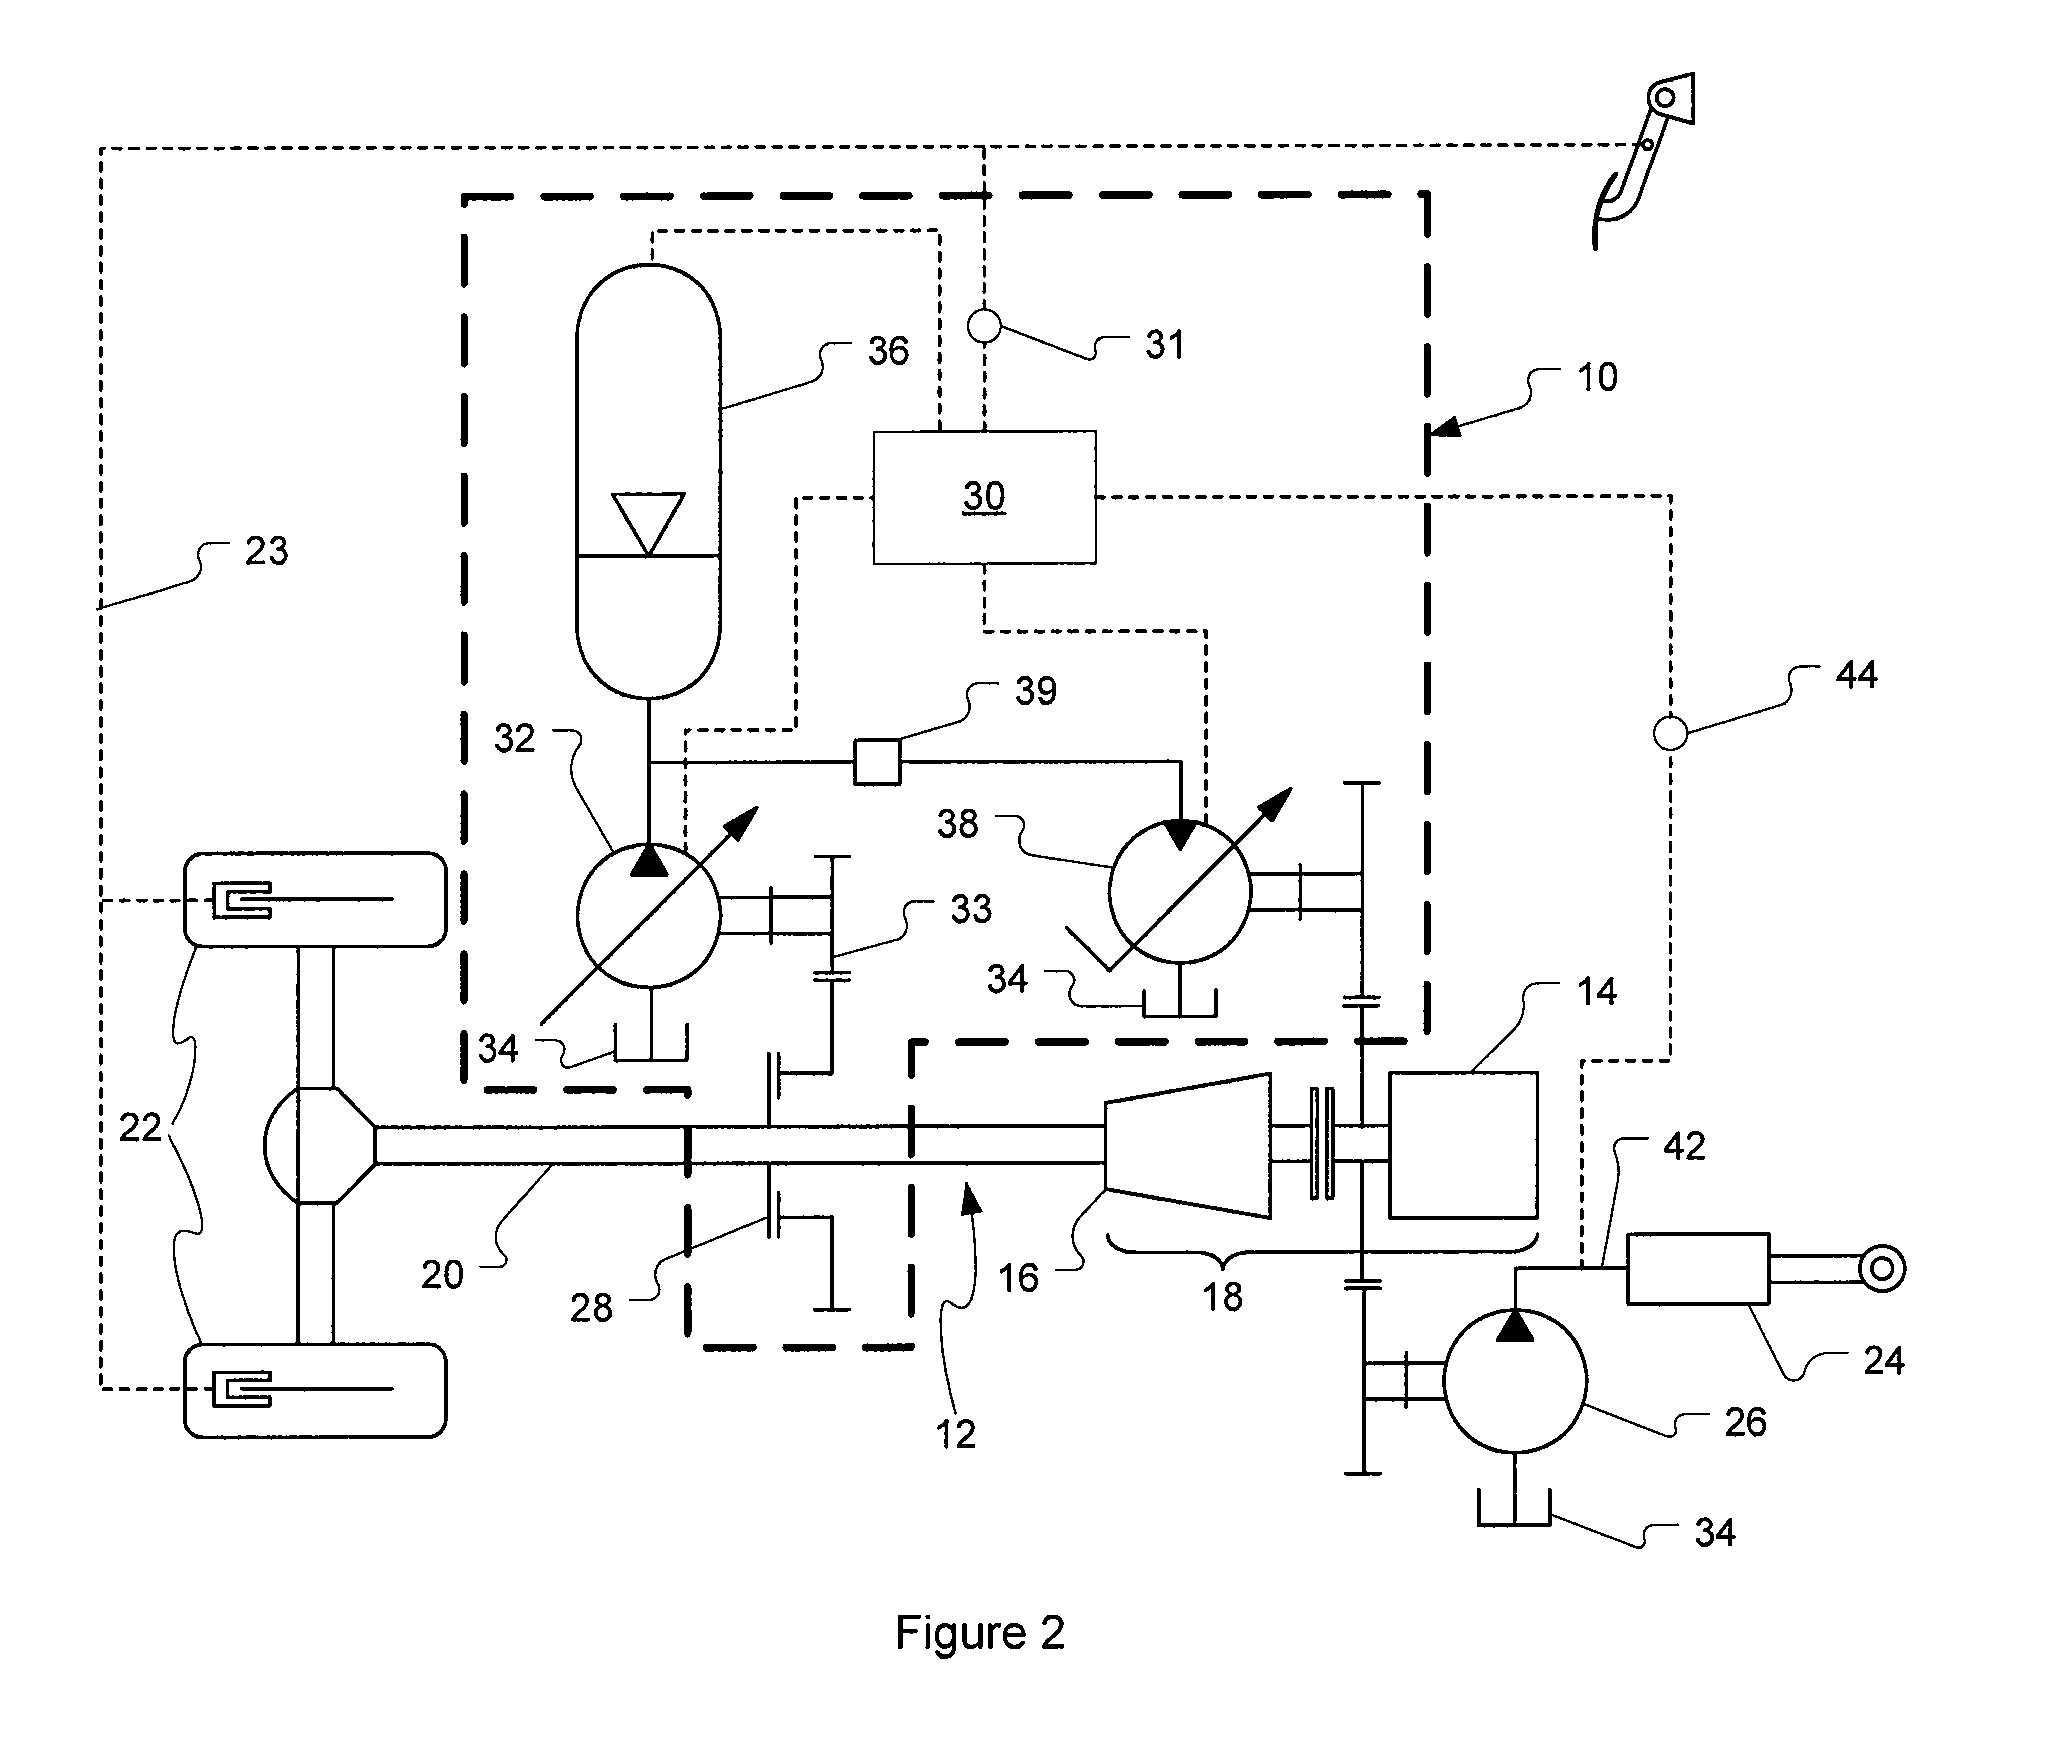 Braking energy recovery system for a vehicle and vehicle equipped with same